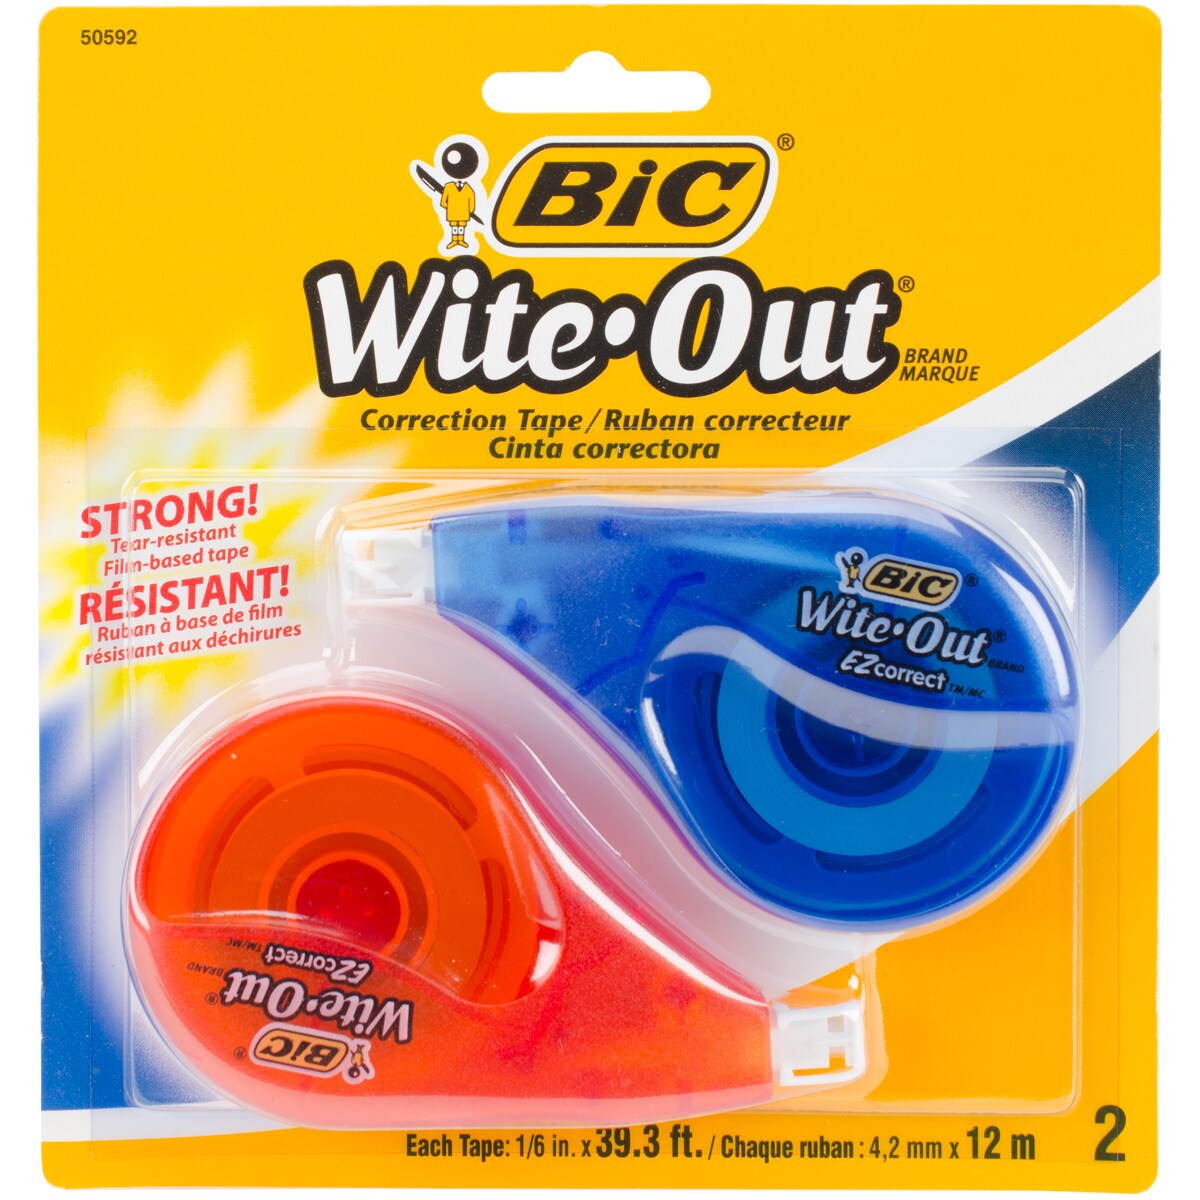 BIC Wite-Out Brand EZ Correct Correction Tape, White, Applies Dry